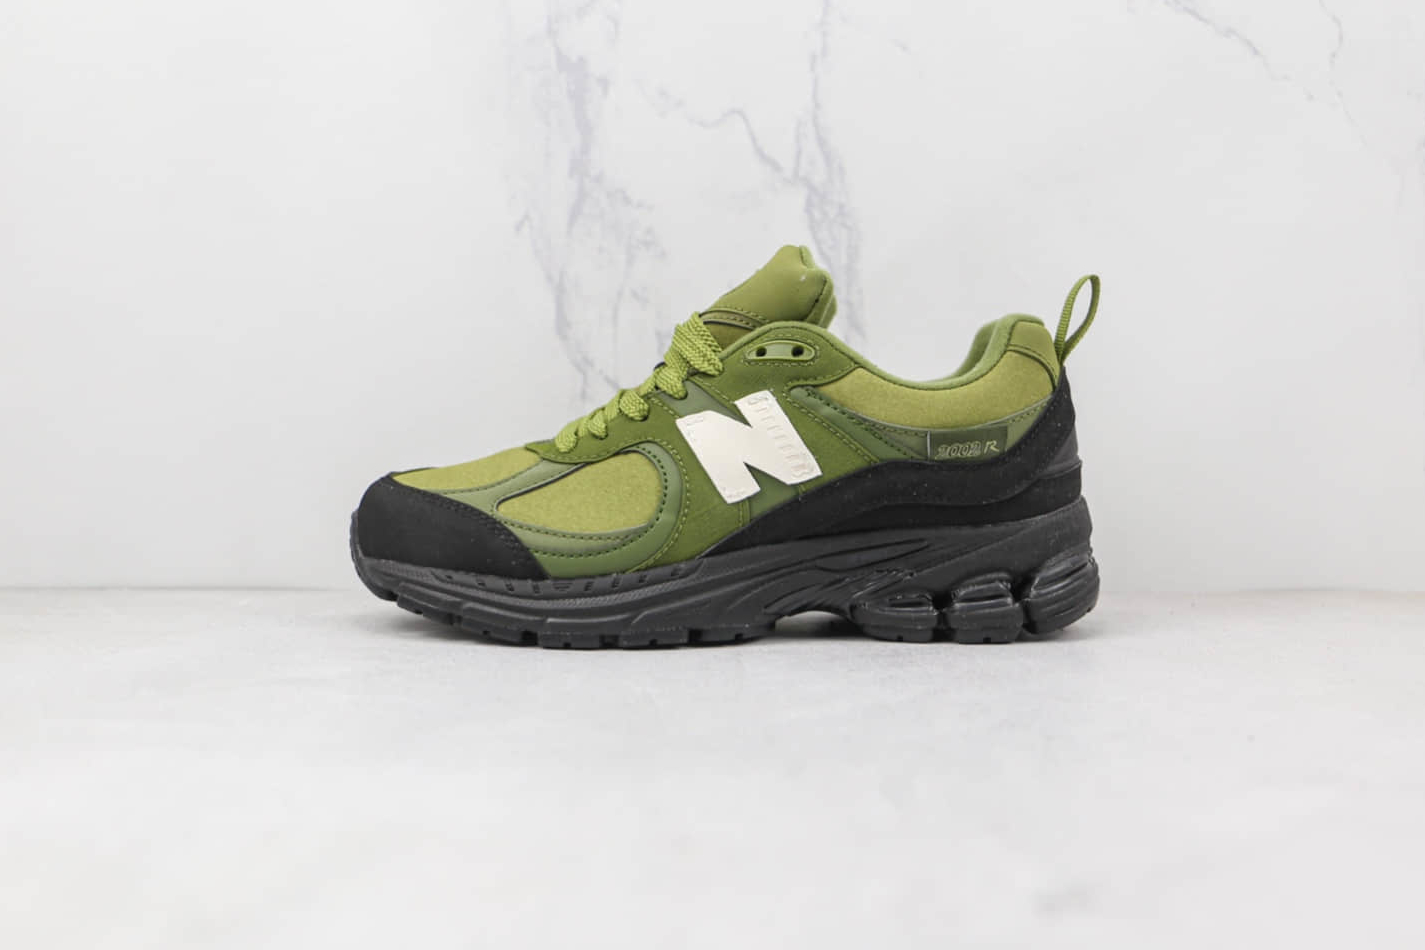 New Balance The Basement x 2002R 'Moss Green' M2002RBB - Exclusive Collaboration for Sneaker Enthusiasts